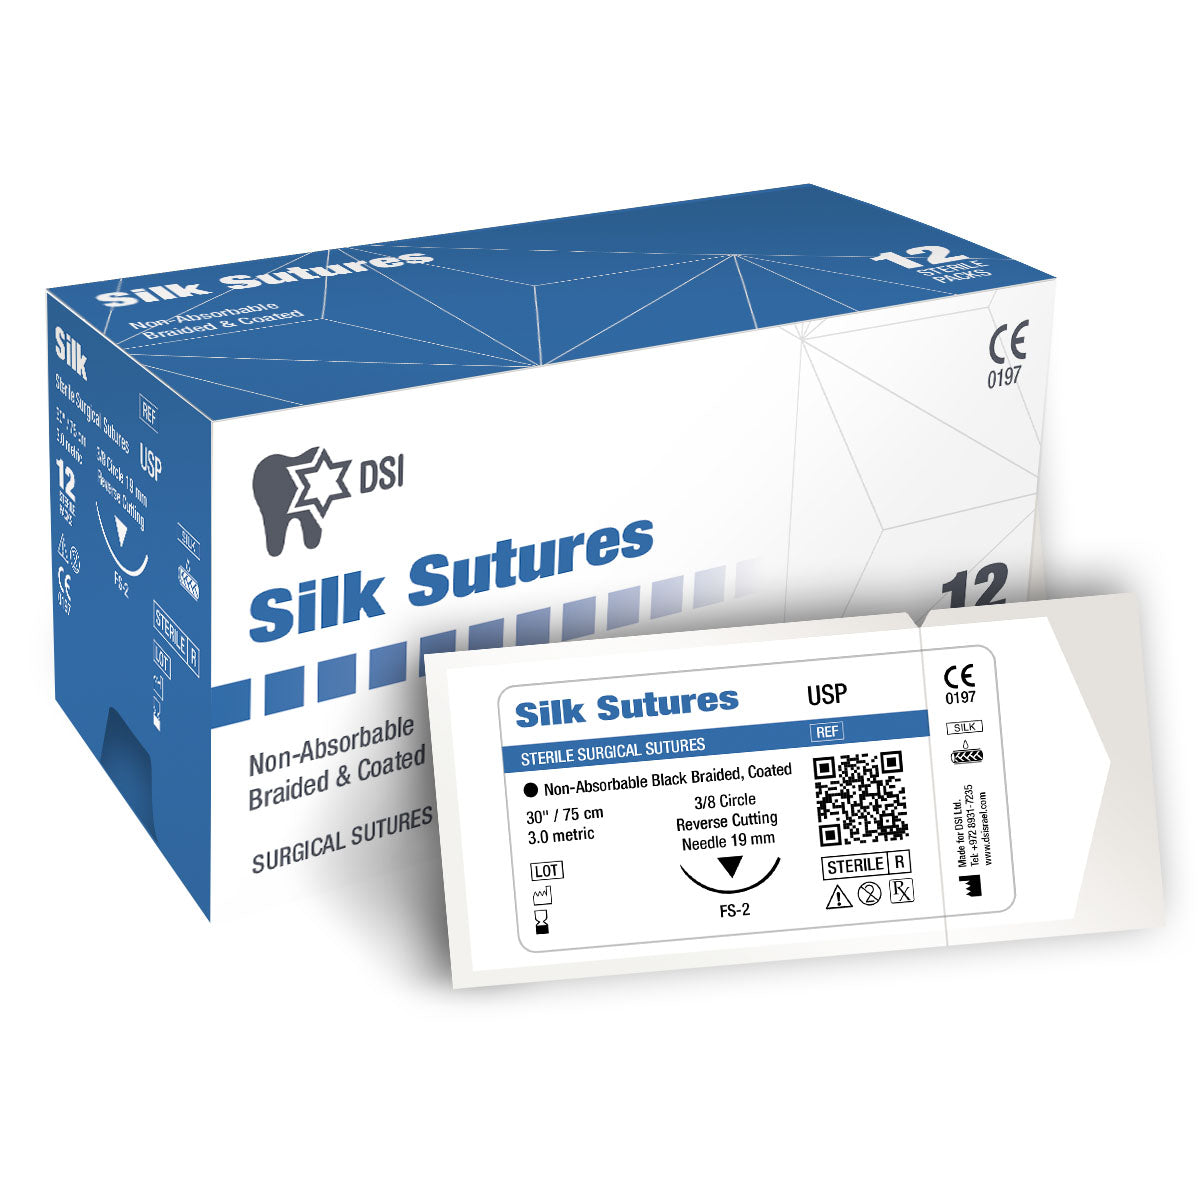 DSI Silk Multifilament Non-resorbable Surgical Sutures 75cm 12pcs pack